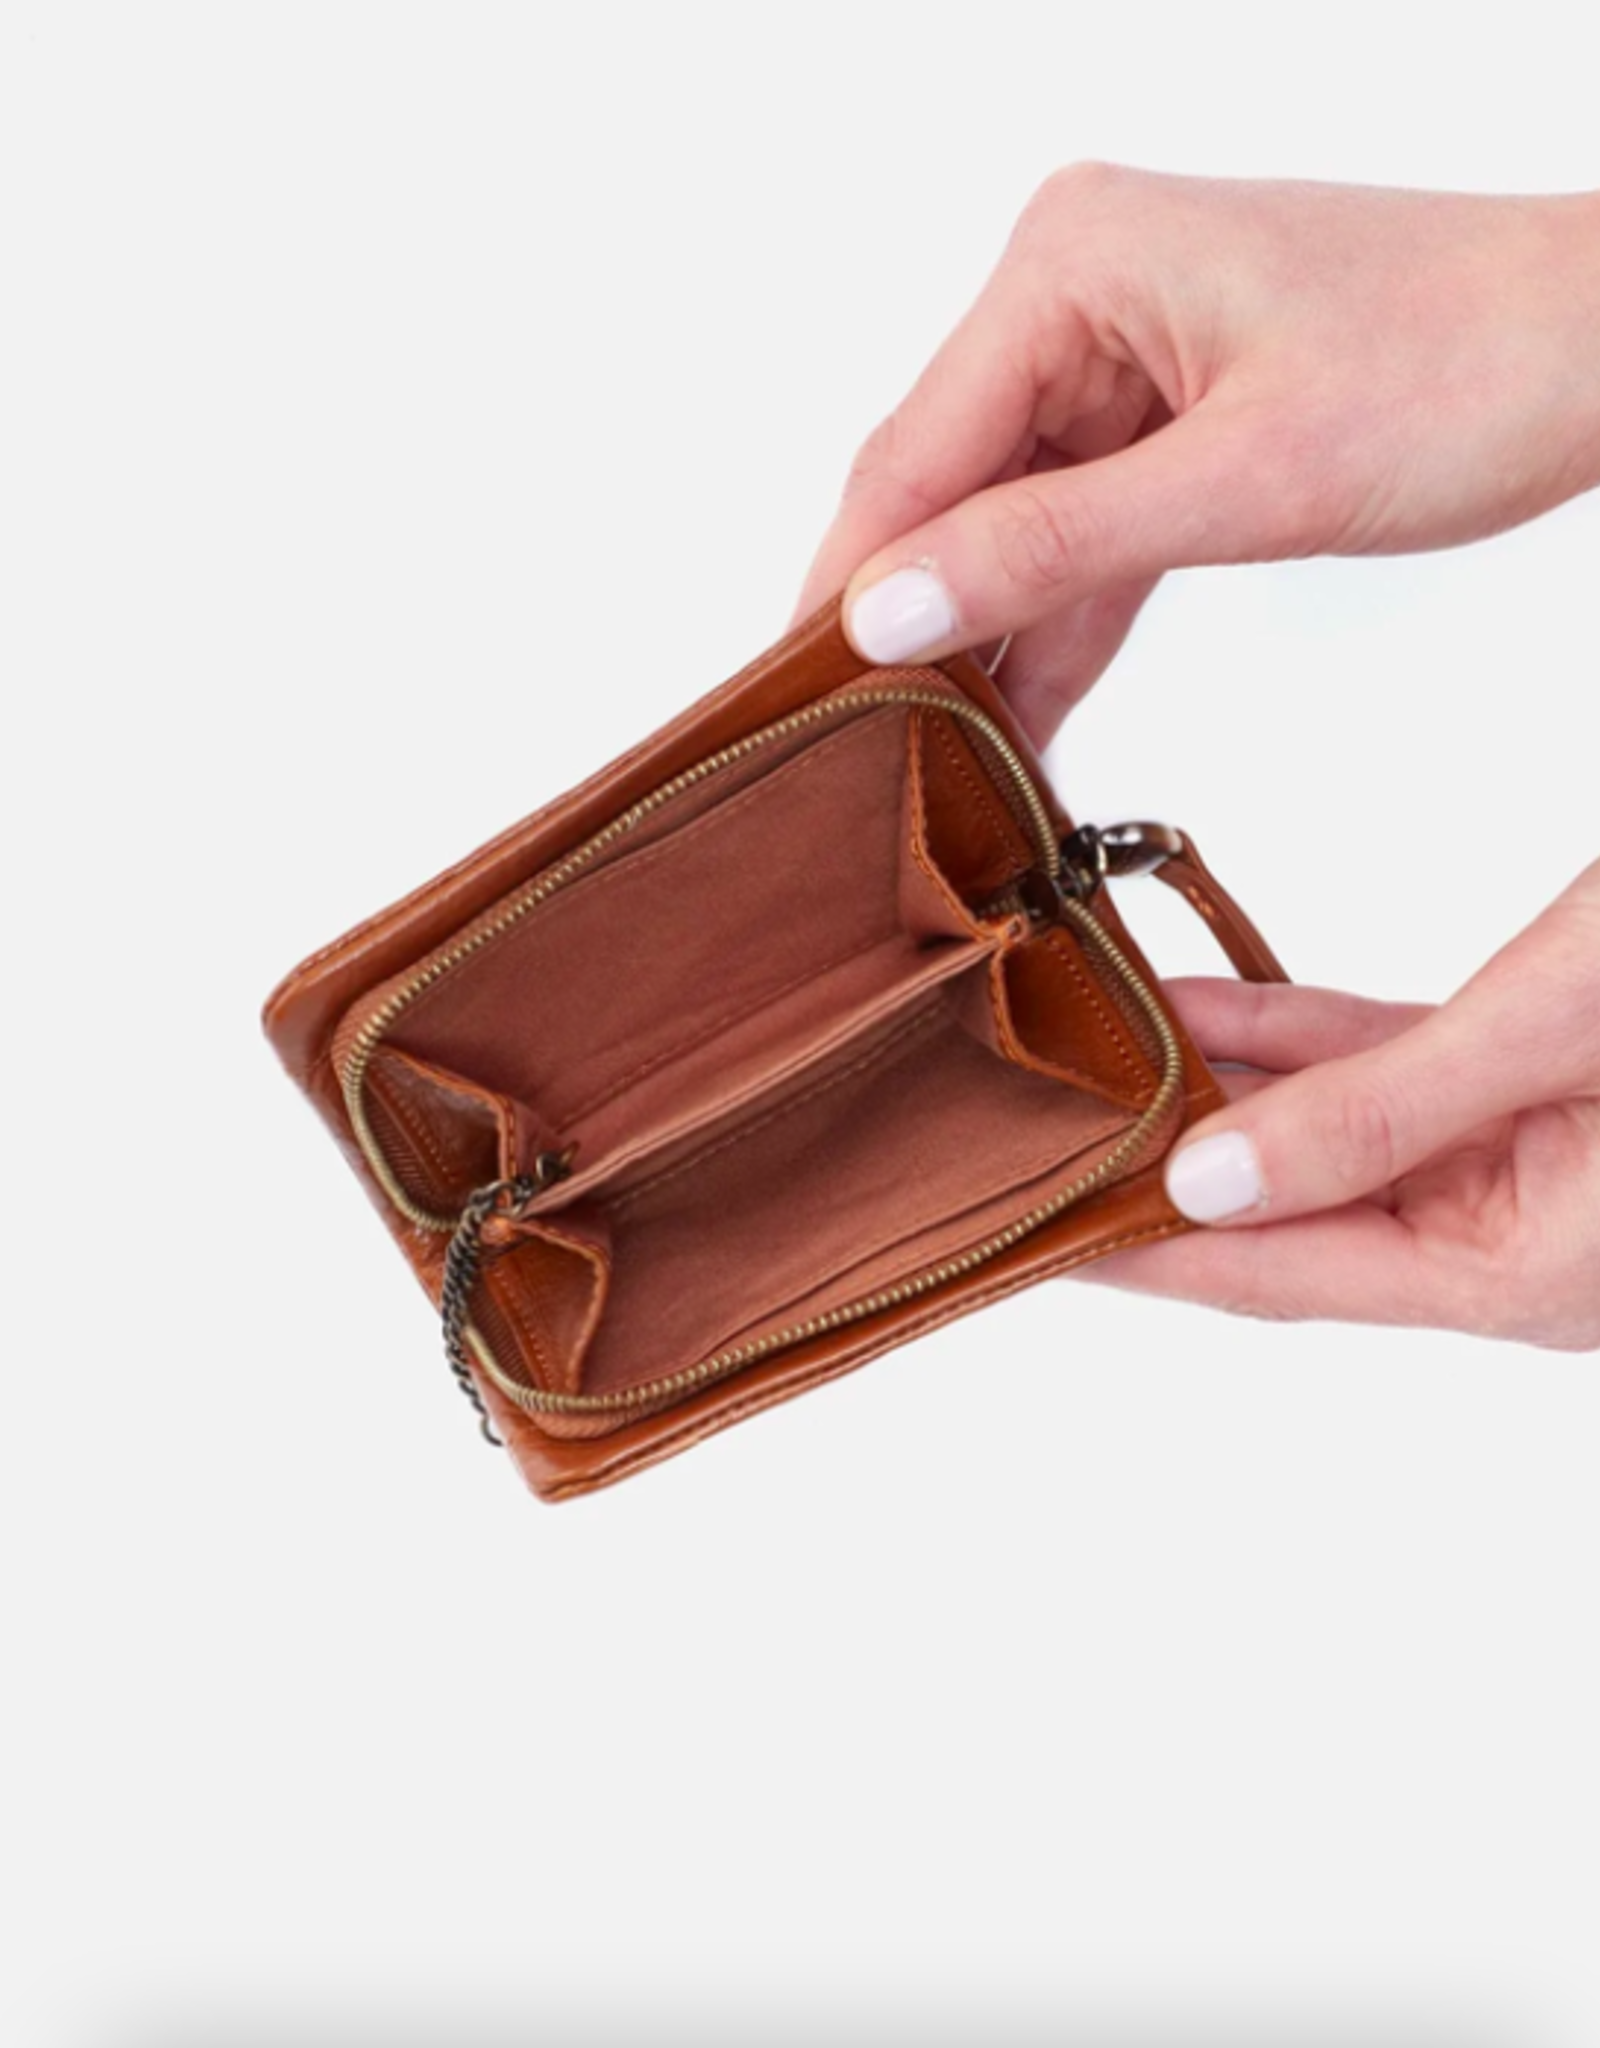 The Small Zip Around Wallet